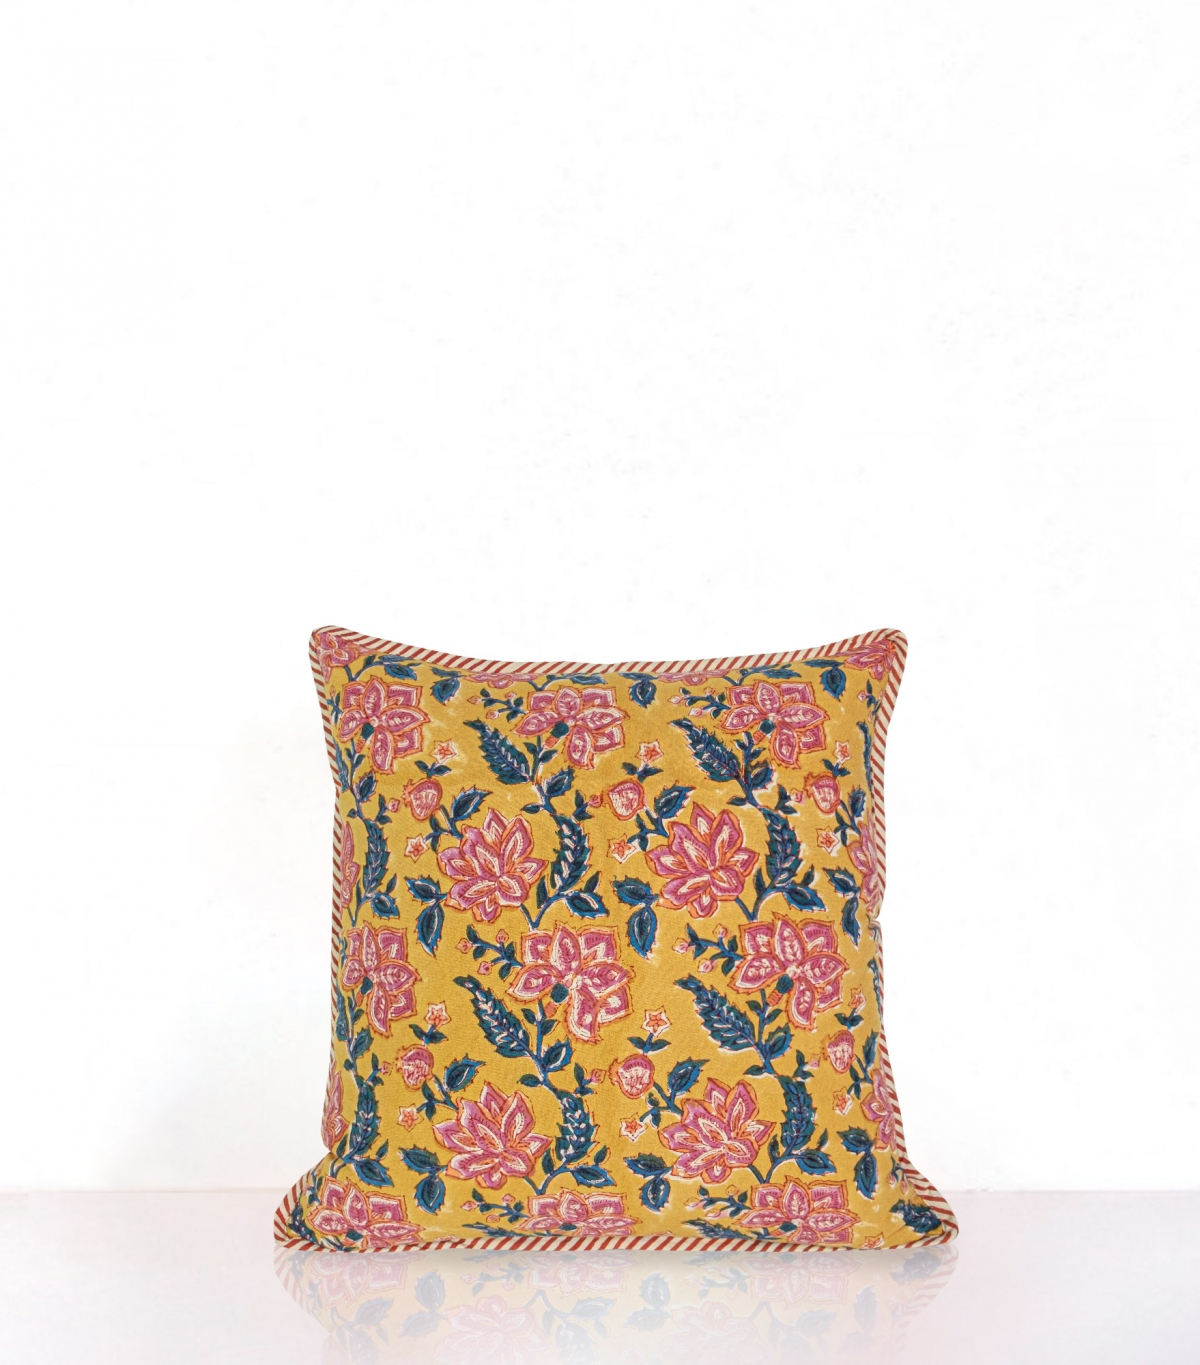 Cushion cover 16x16 inches - multi yellow